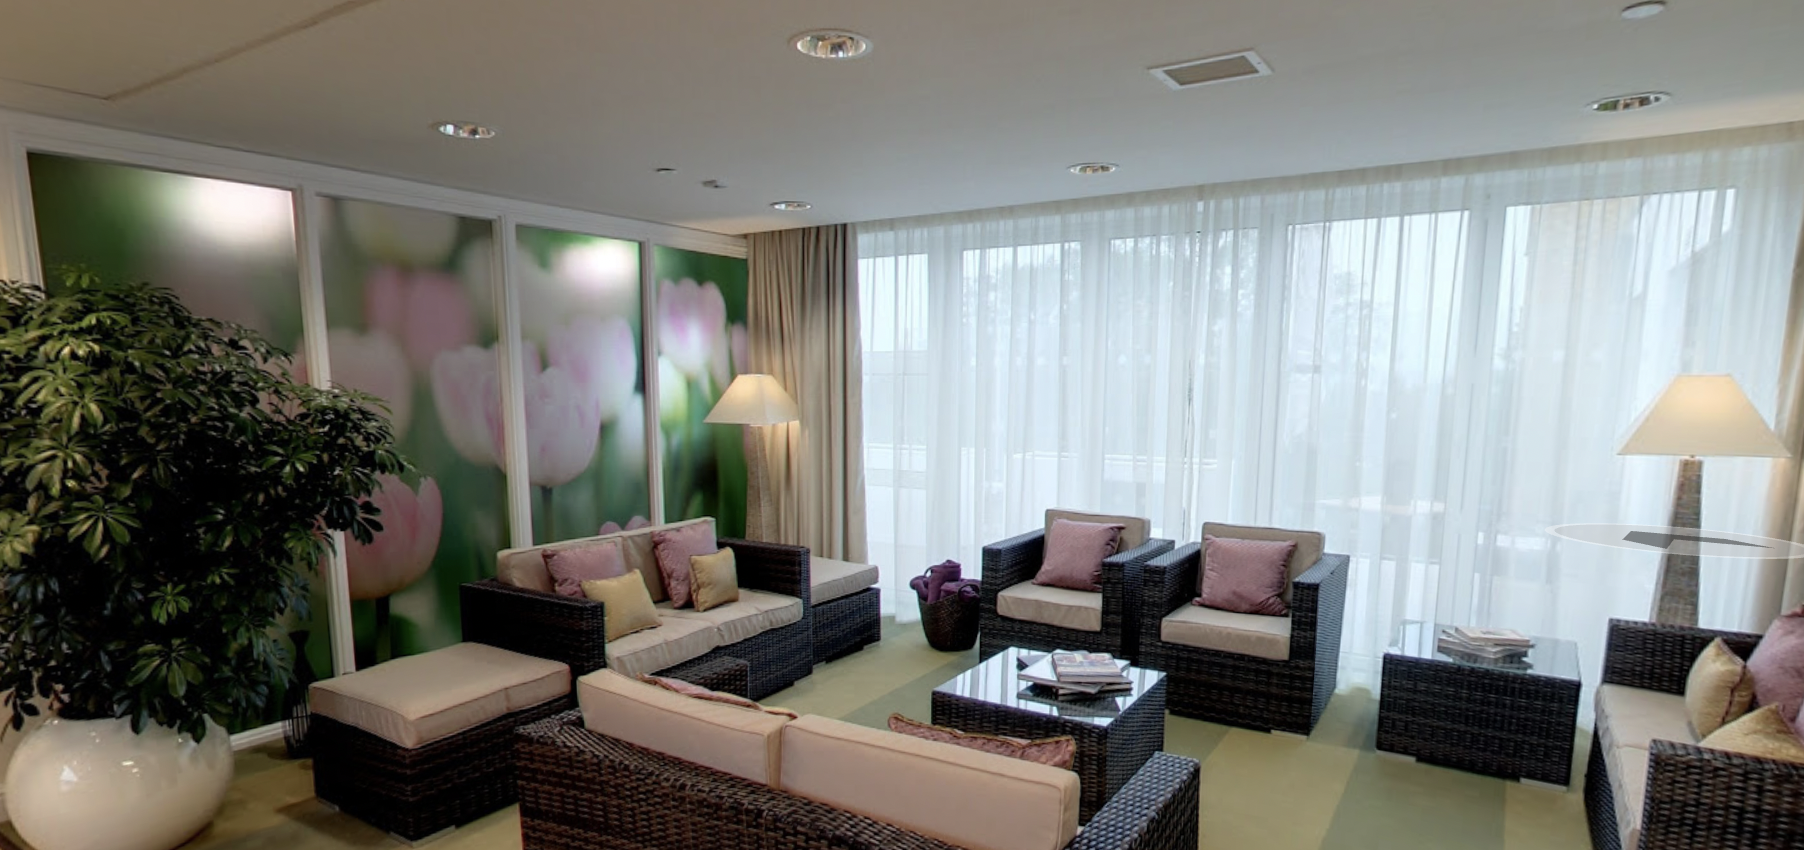 The communal area in the Mayflower Court Care Home in Southampton